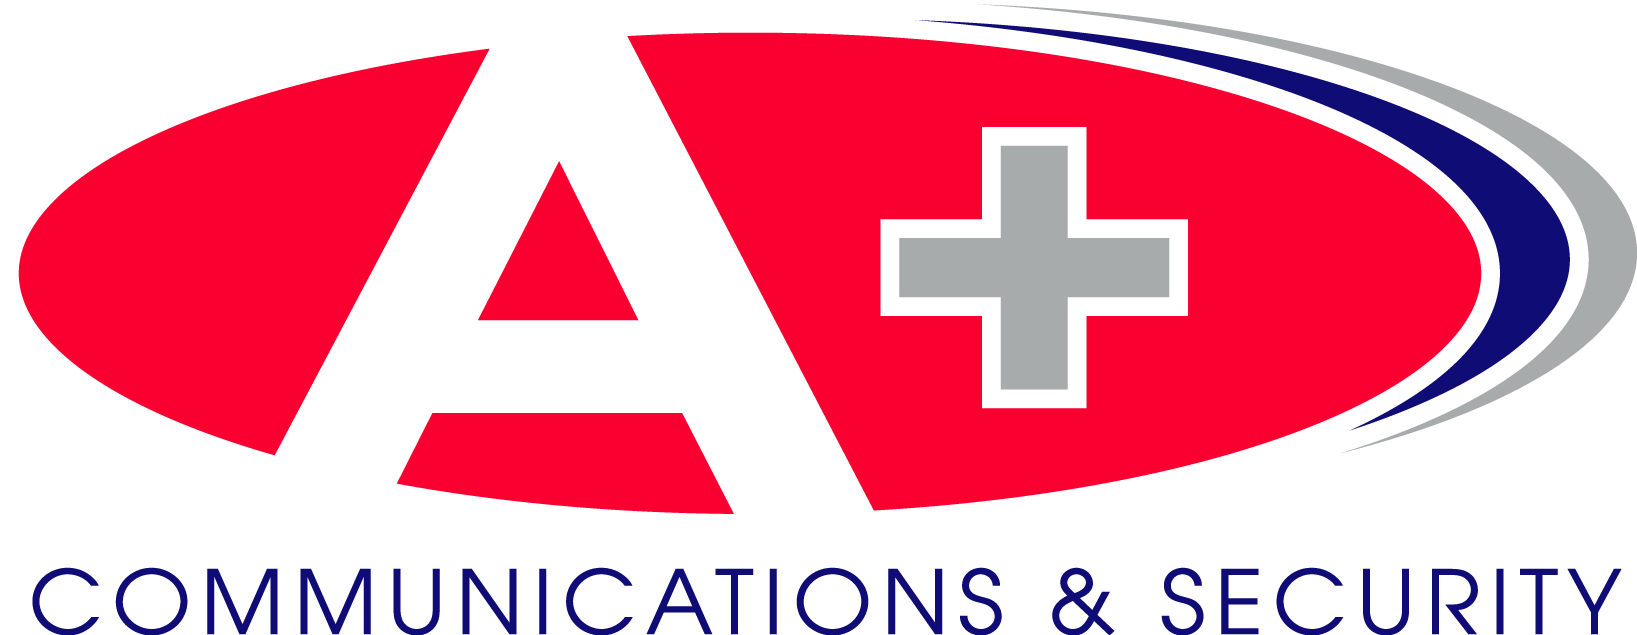 A+ Communications, Security, & Home Solutions - A Hy-Vee Company